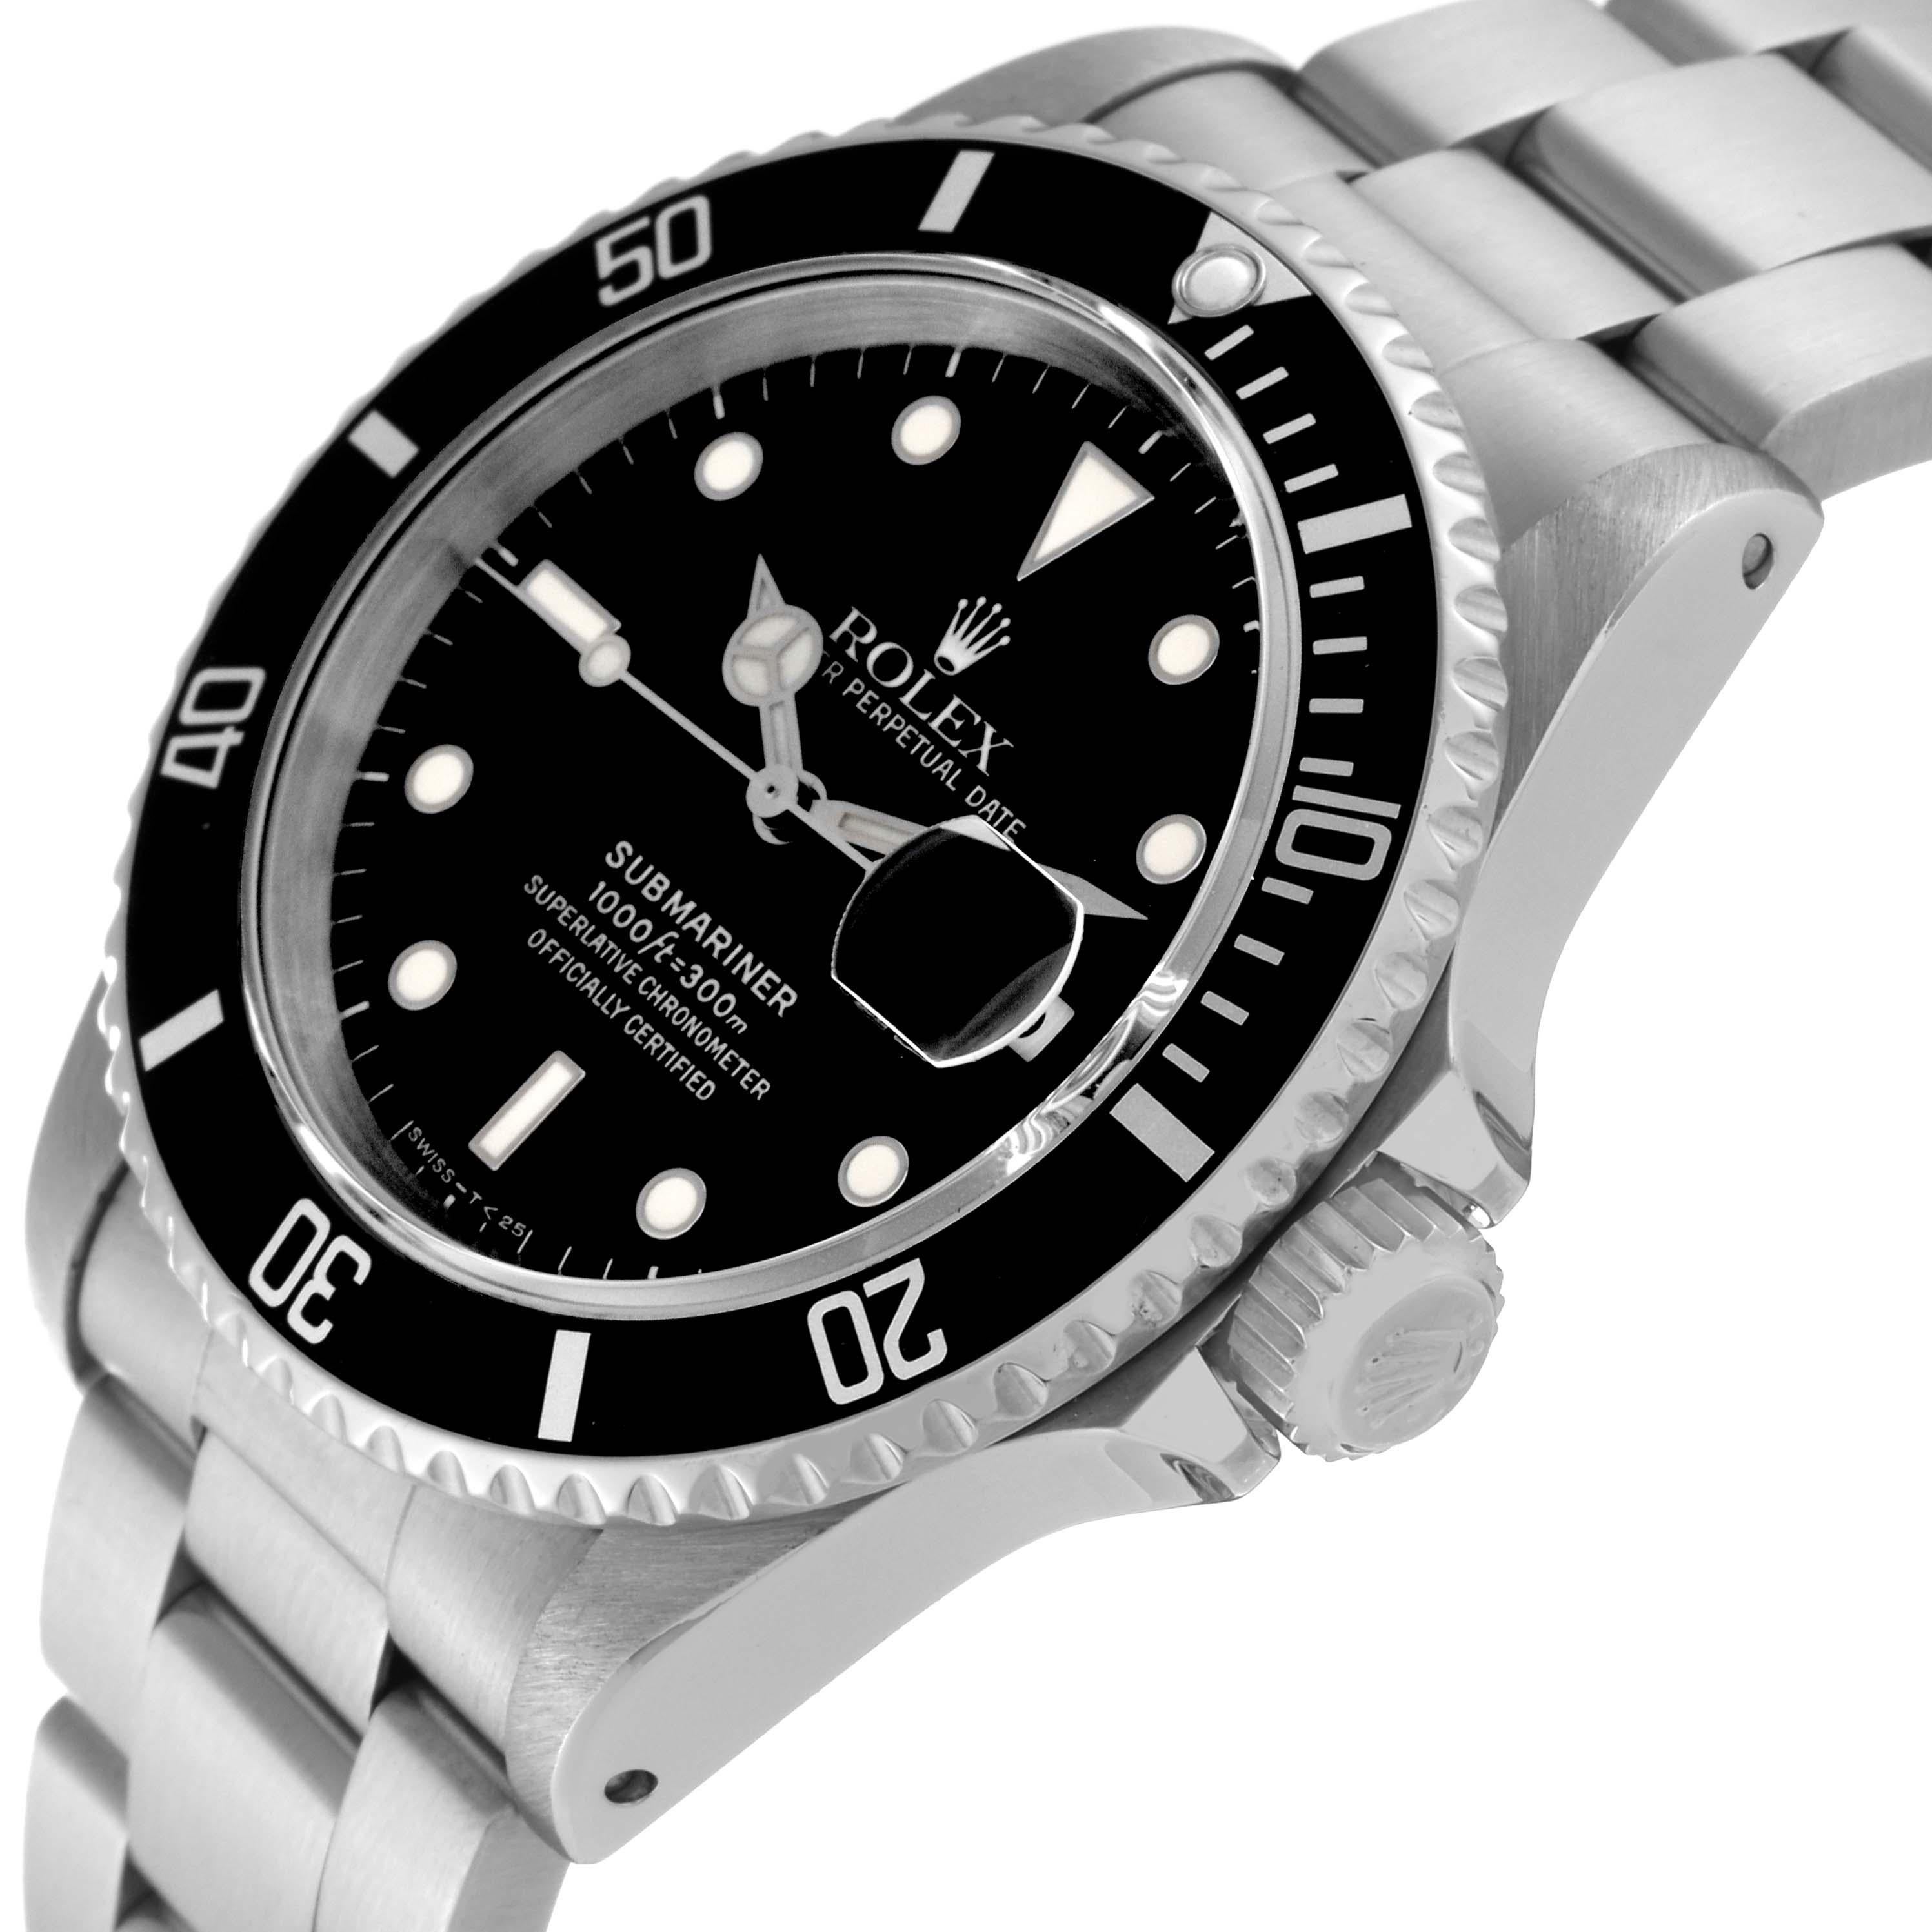 Rolex Submariner Date Black Dial Steel Mens Watch 16610 Box Papers 3